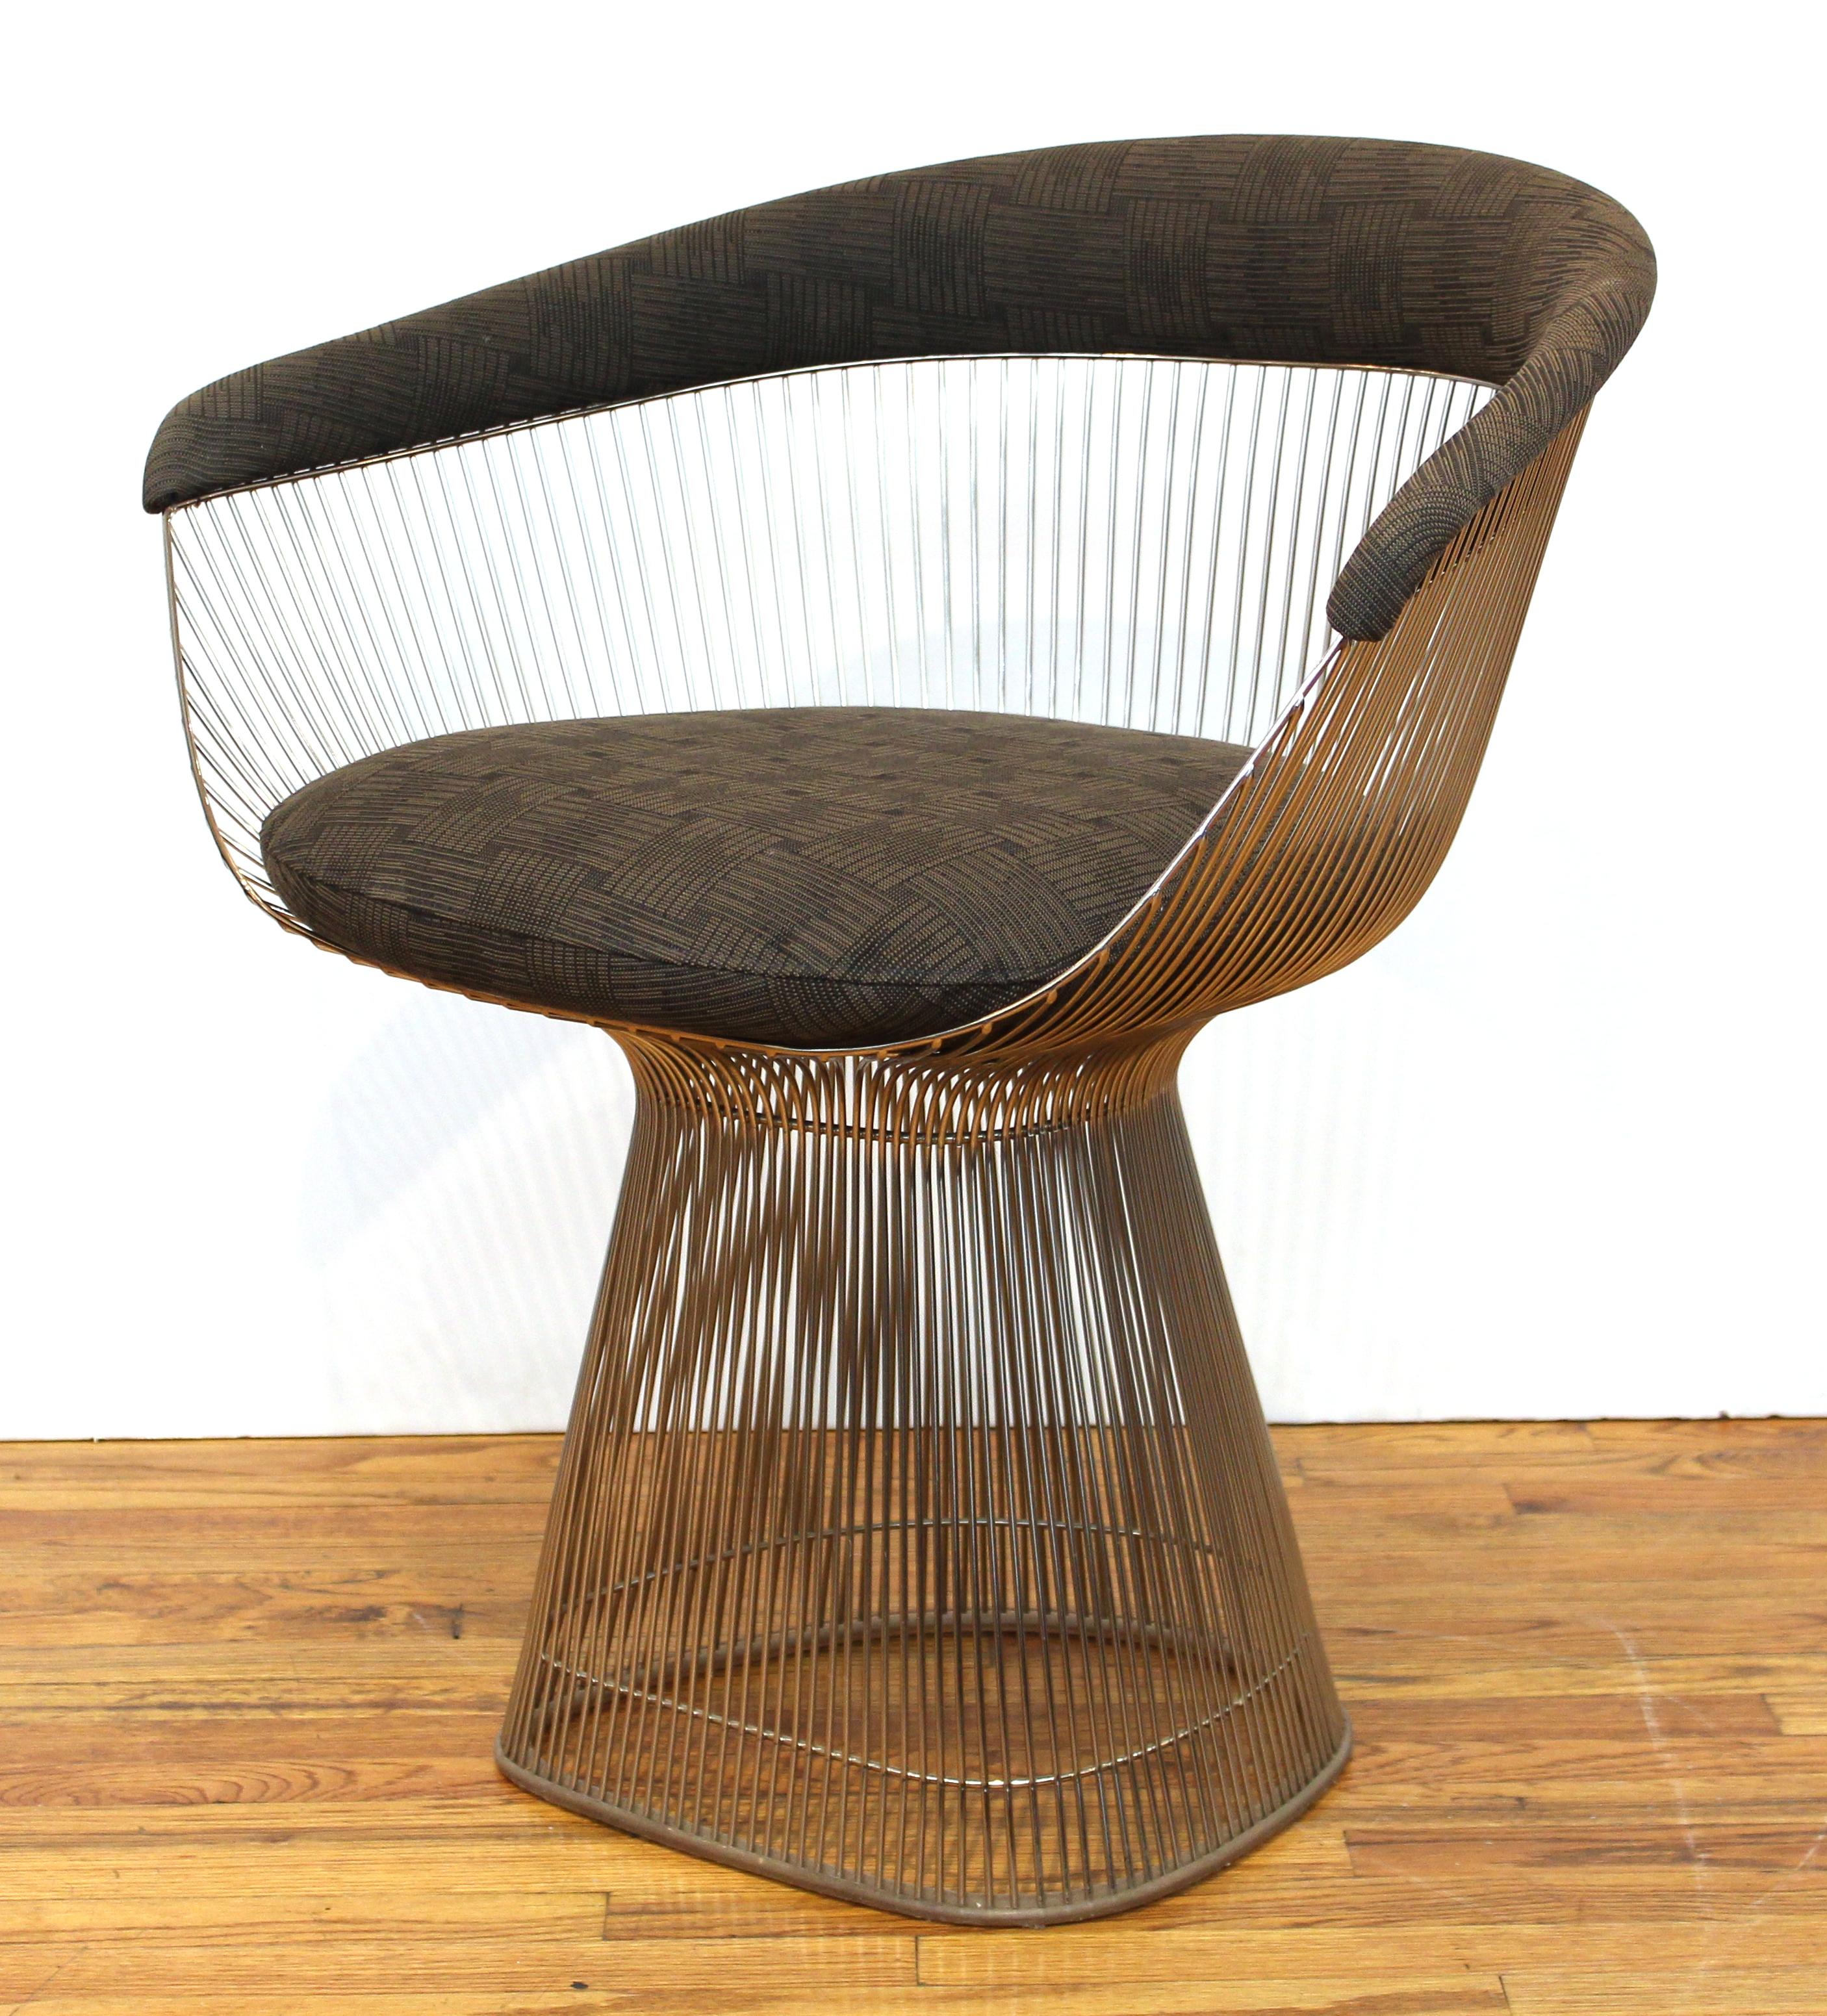 Metal Warren Platner for Knoll Mid-Century Modern Dining Table & Chairs